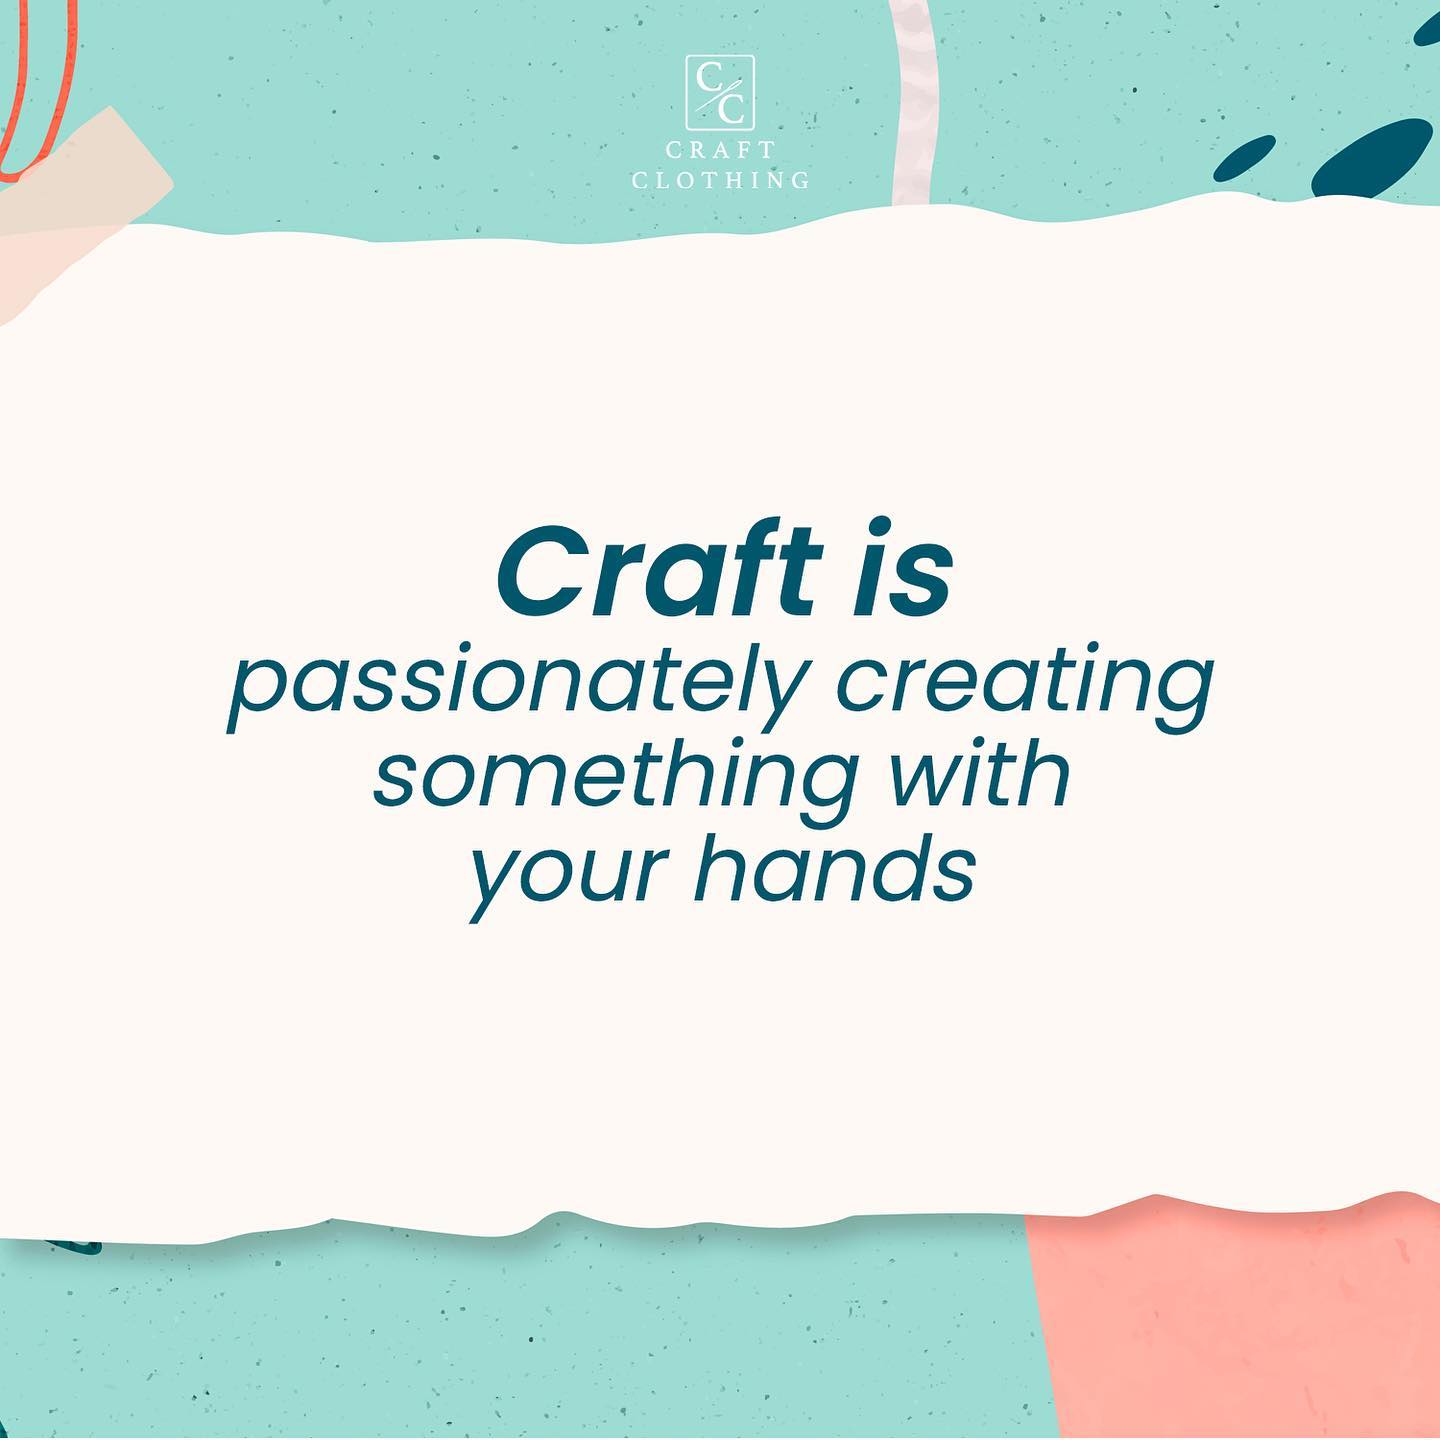 Craft is passionately creating something with your hands